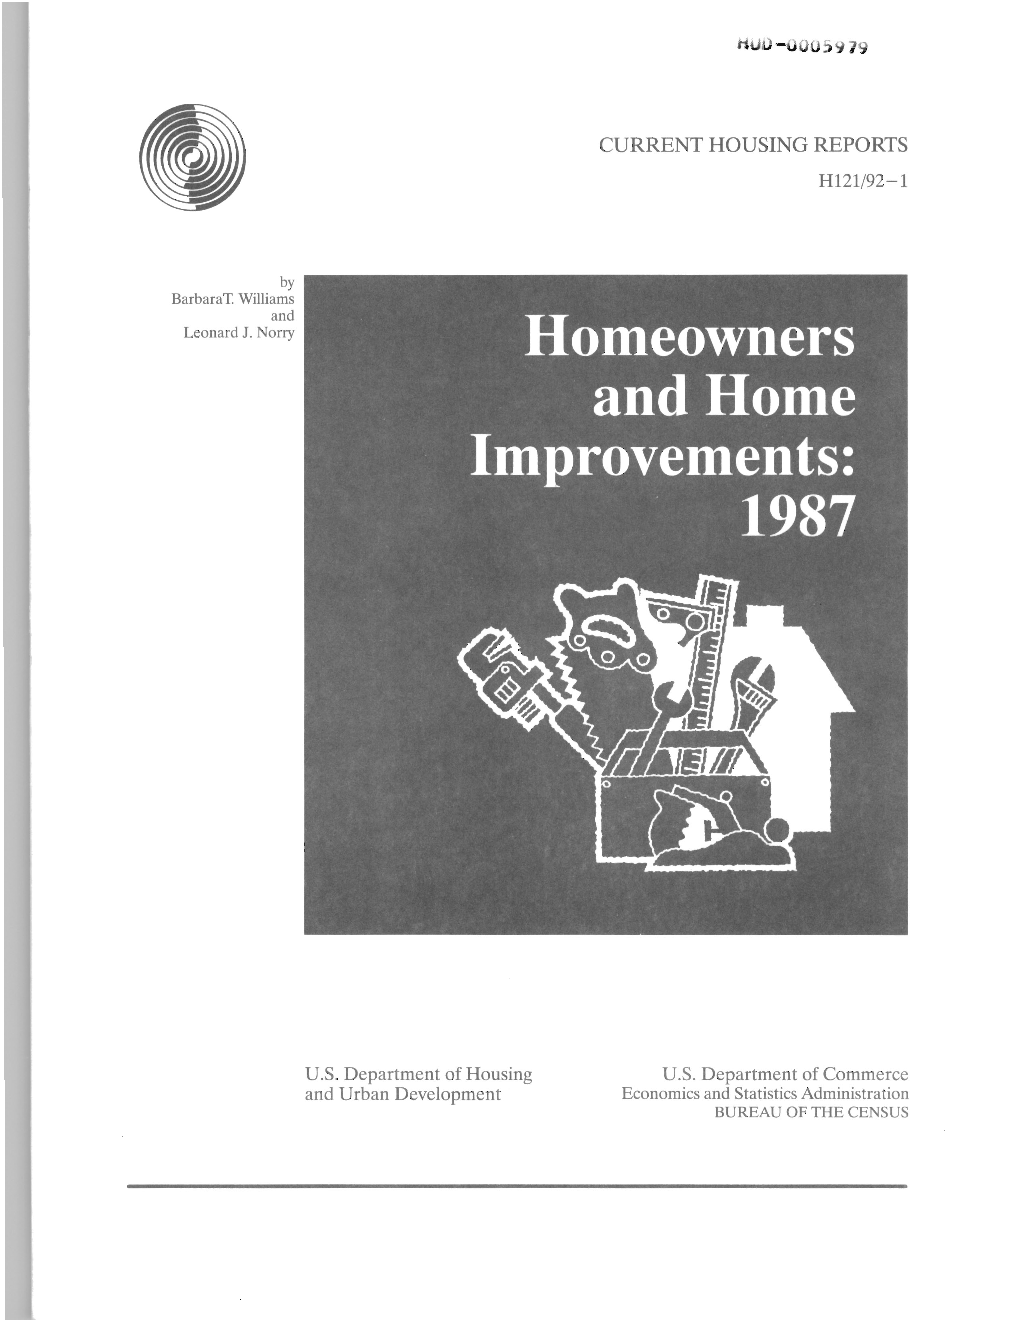 Homeowners and Home Improvements. 1987